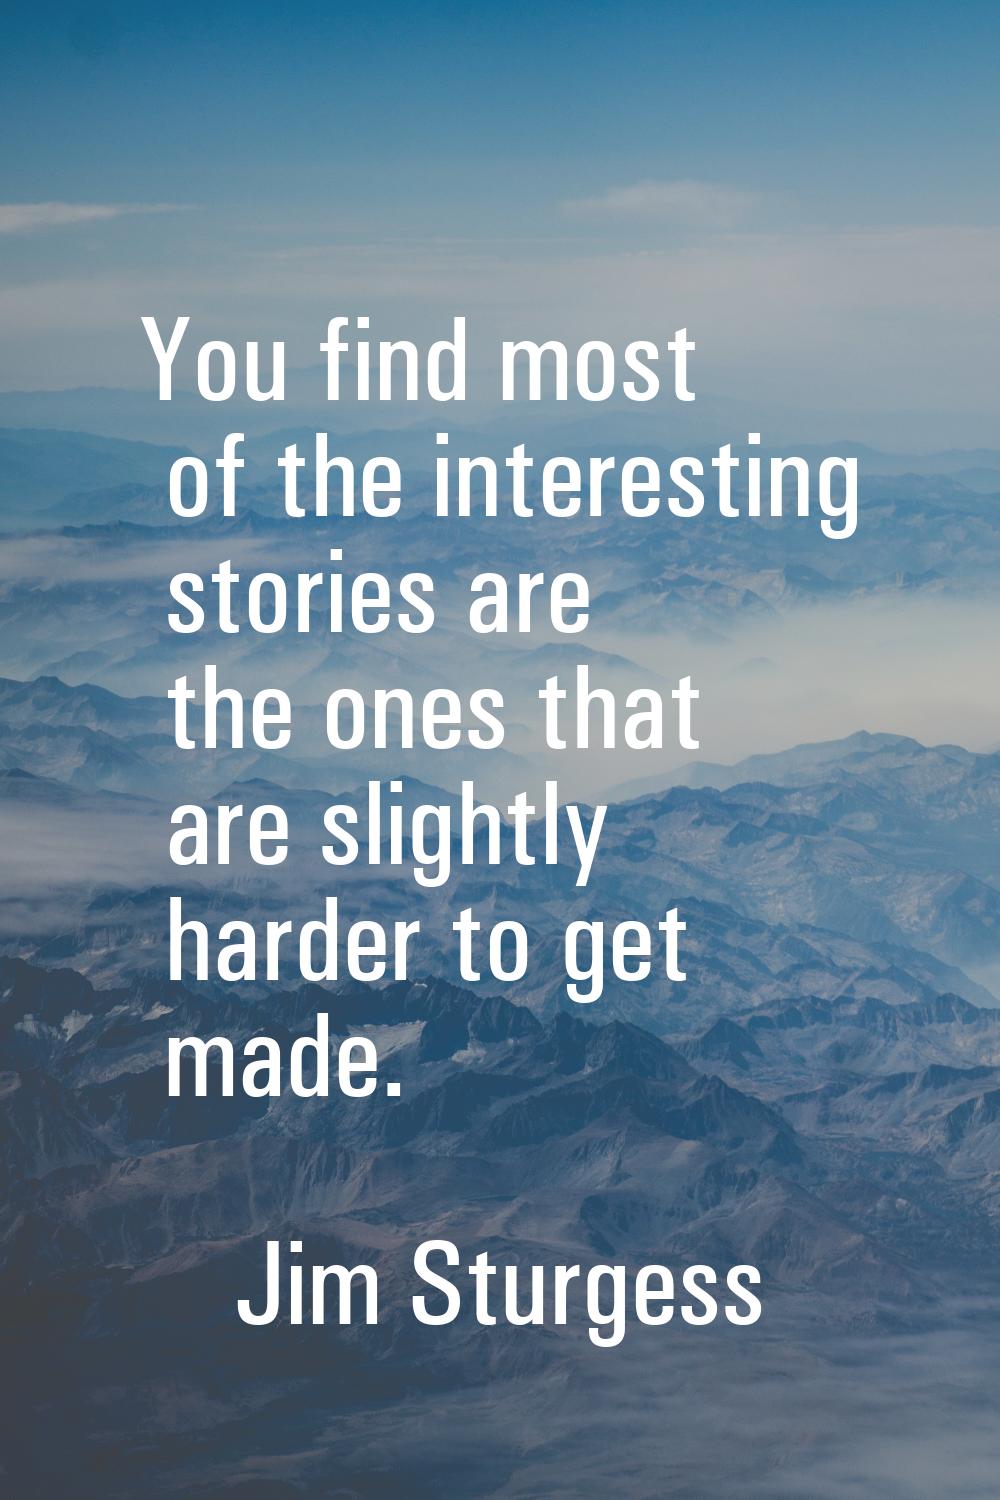 You find most of the interesting stories are the ones that are slightly harder to get made.